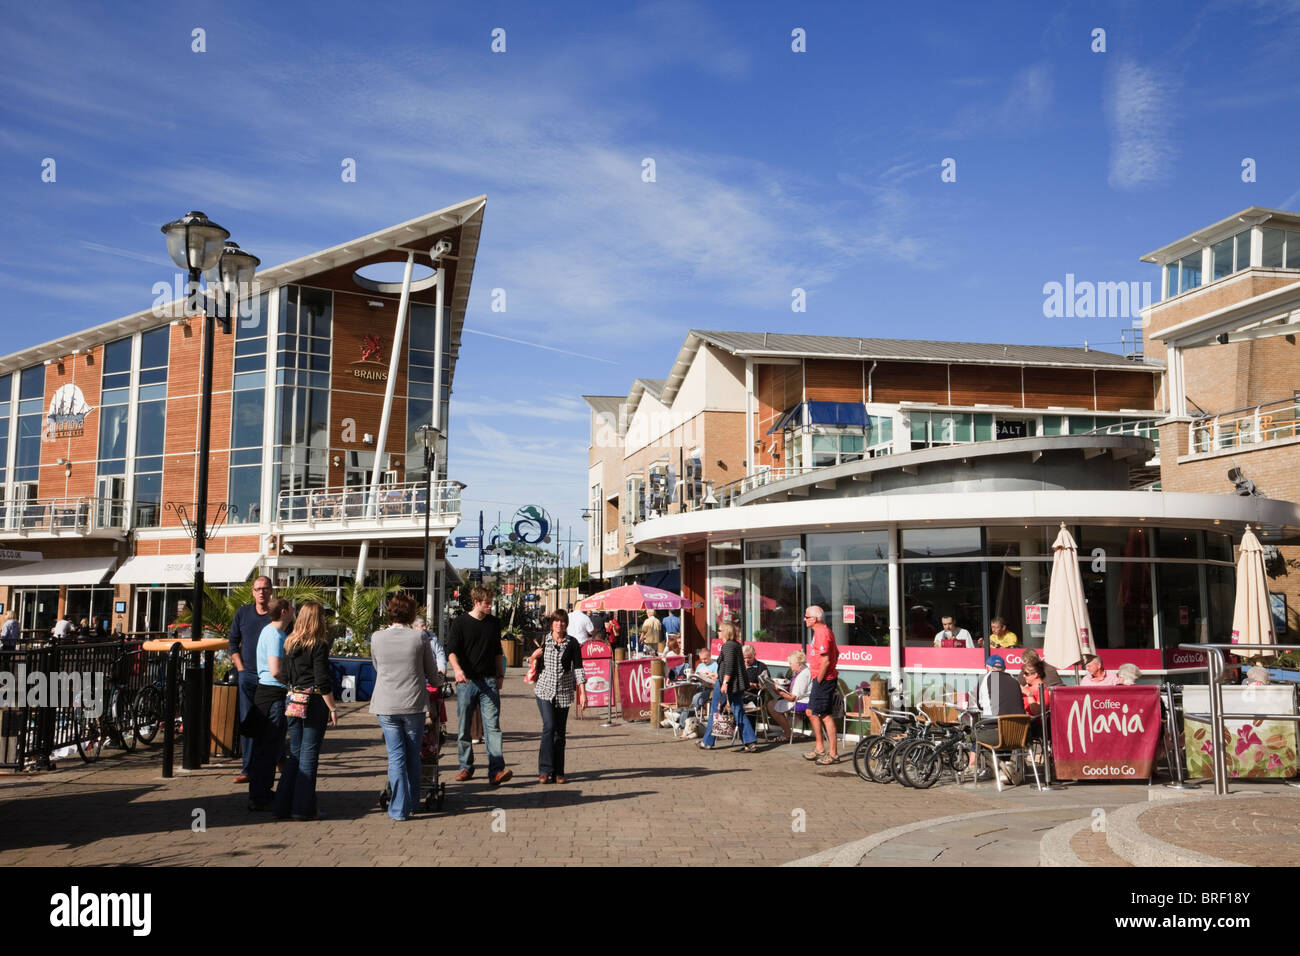 Mermaid Quay cafes and shops busy with people on the waterfront. Cardiff Bay (Bae Caerdydd), Glamorgan, South Wales, UK, Britain Stock Photo